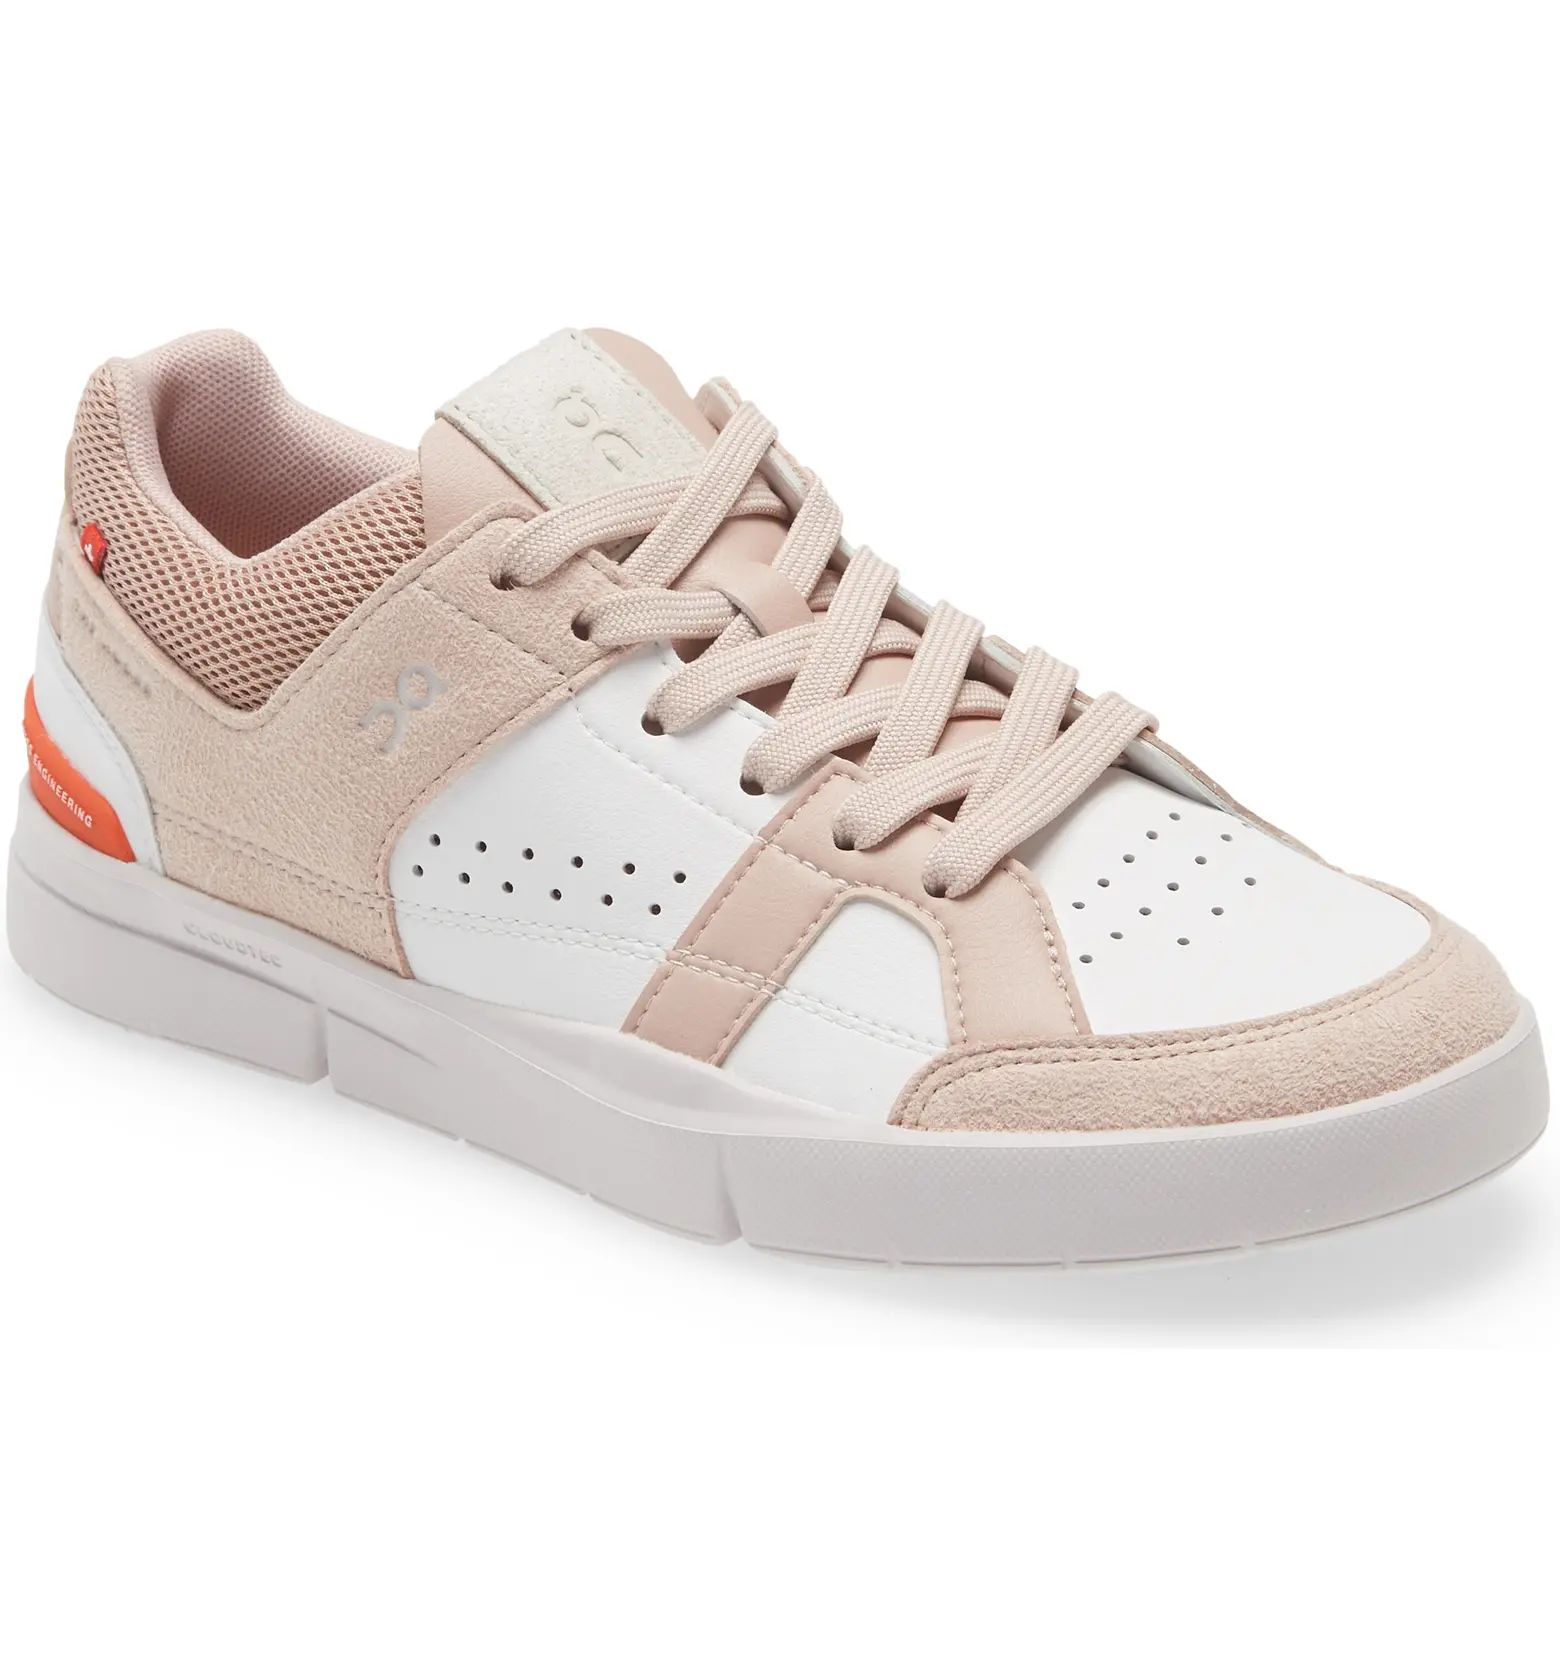 THE ROGER Clubhouse Tennis Sneaker | Nordstrom